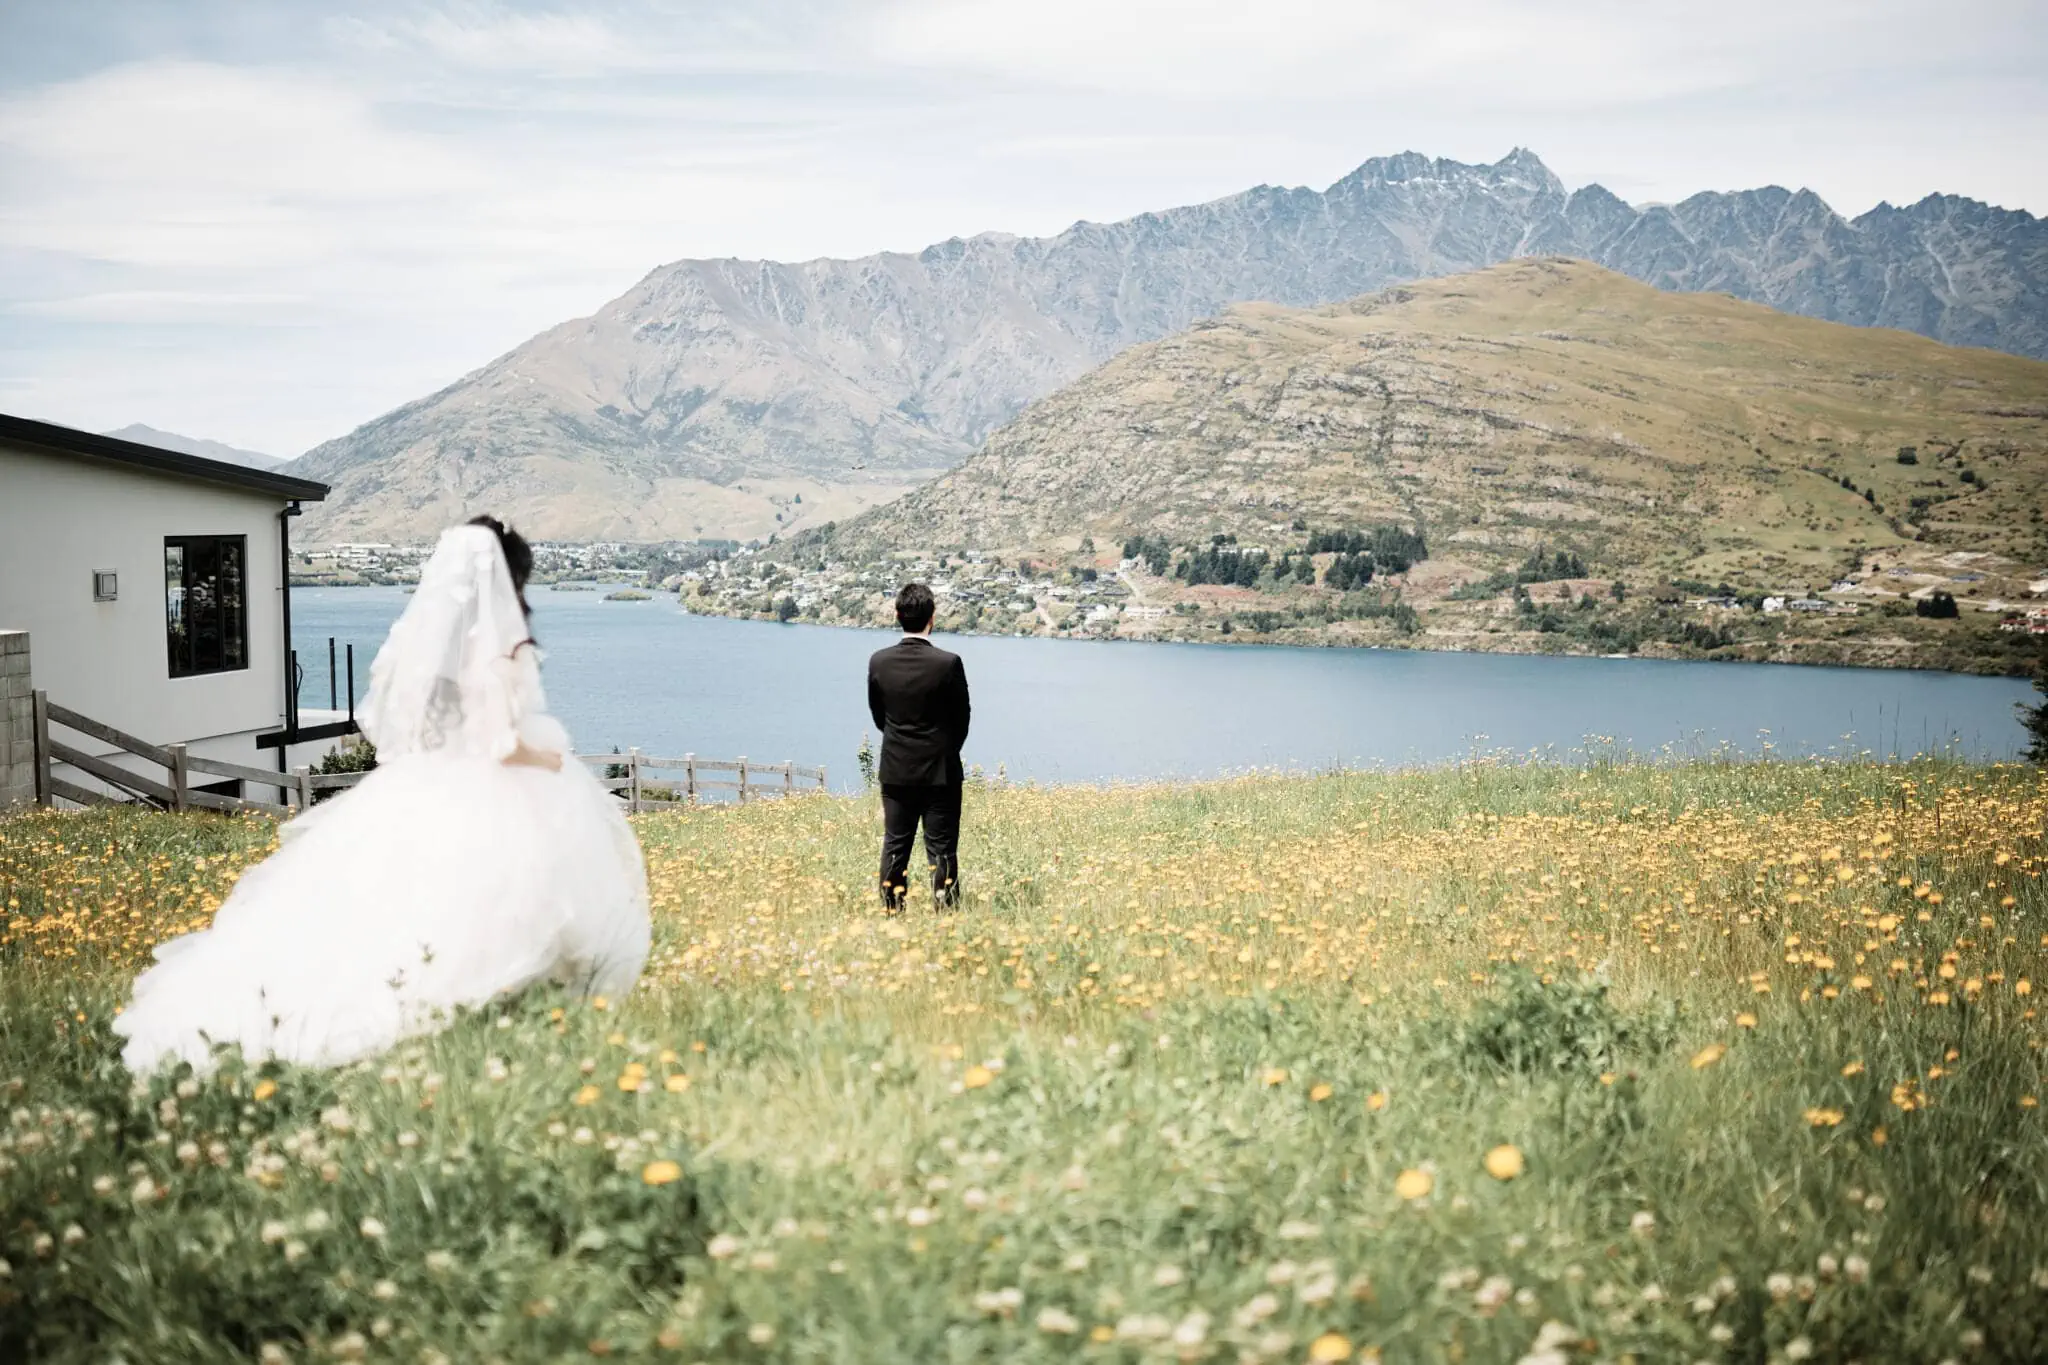 Carlos and Wanzhu exchanging vows during their intimate elopement wedding near a lake.